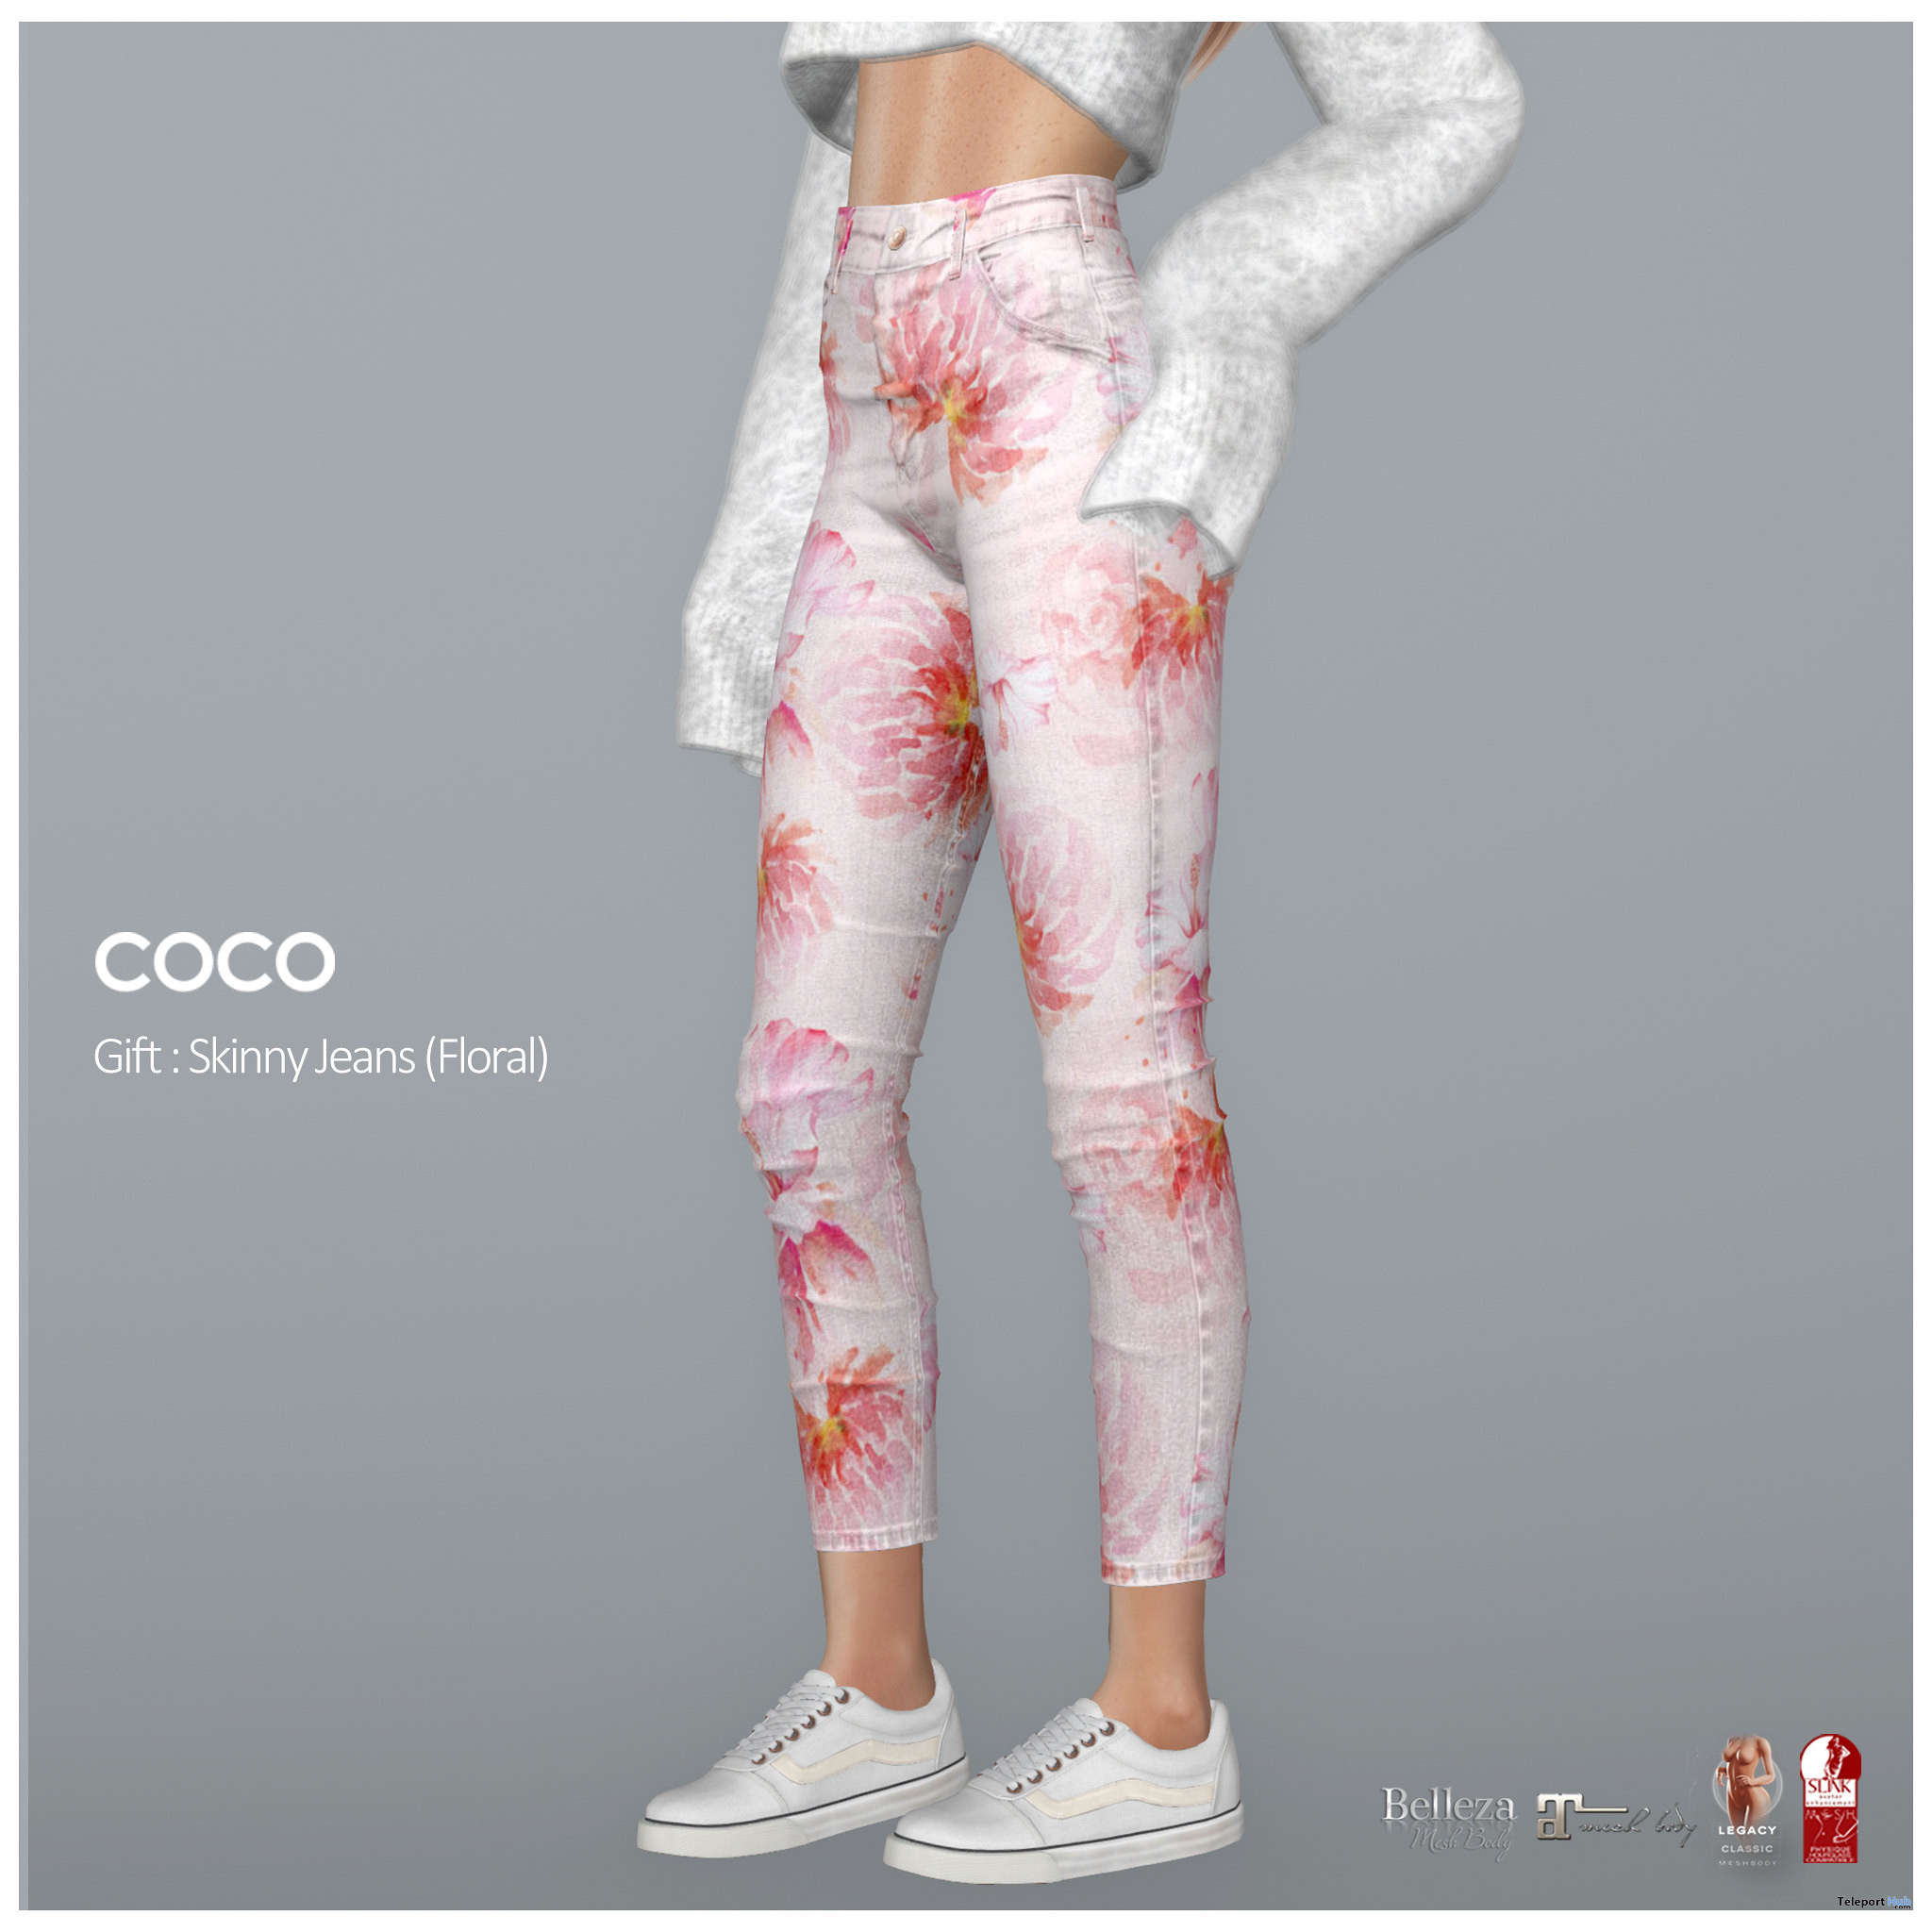 Skinny Jeans Floral September 2022 Group Gift by COCO Designs - Teleport Hub - teleporthub.com